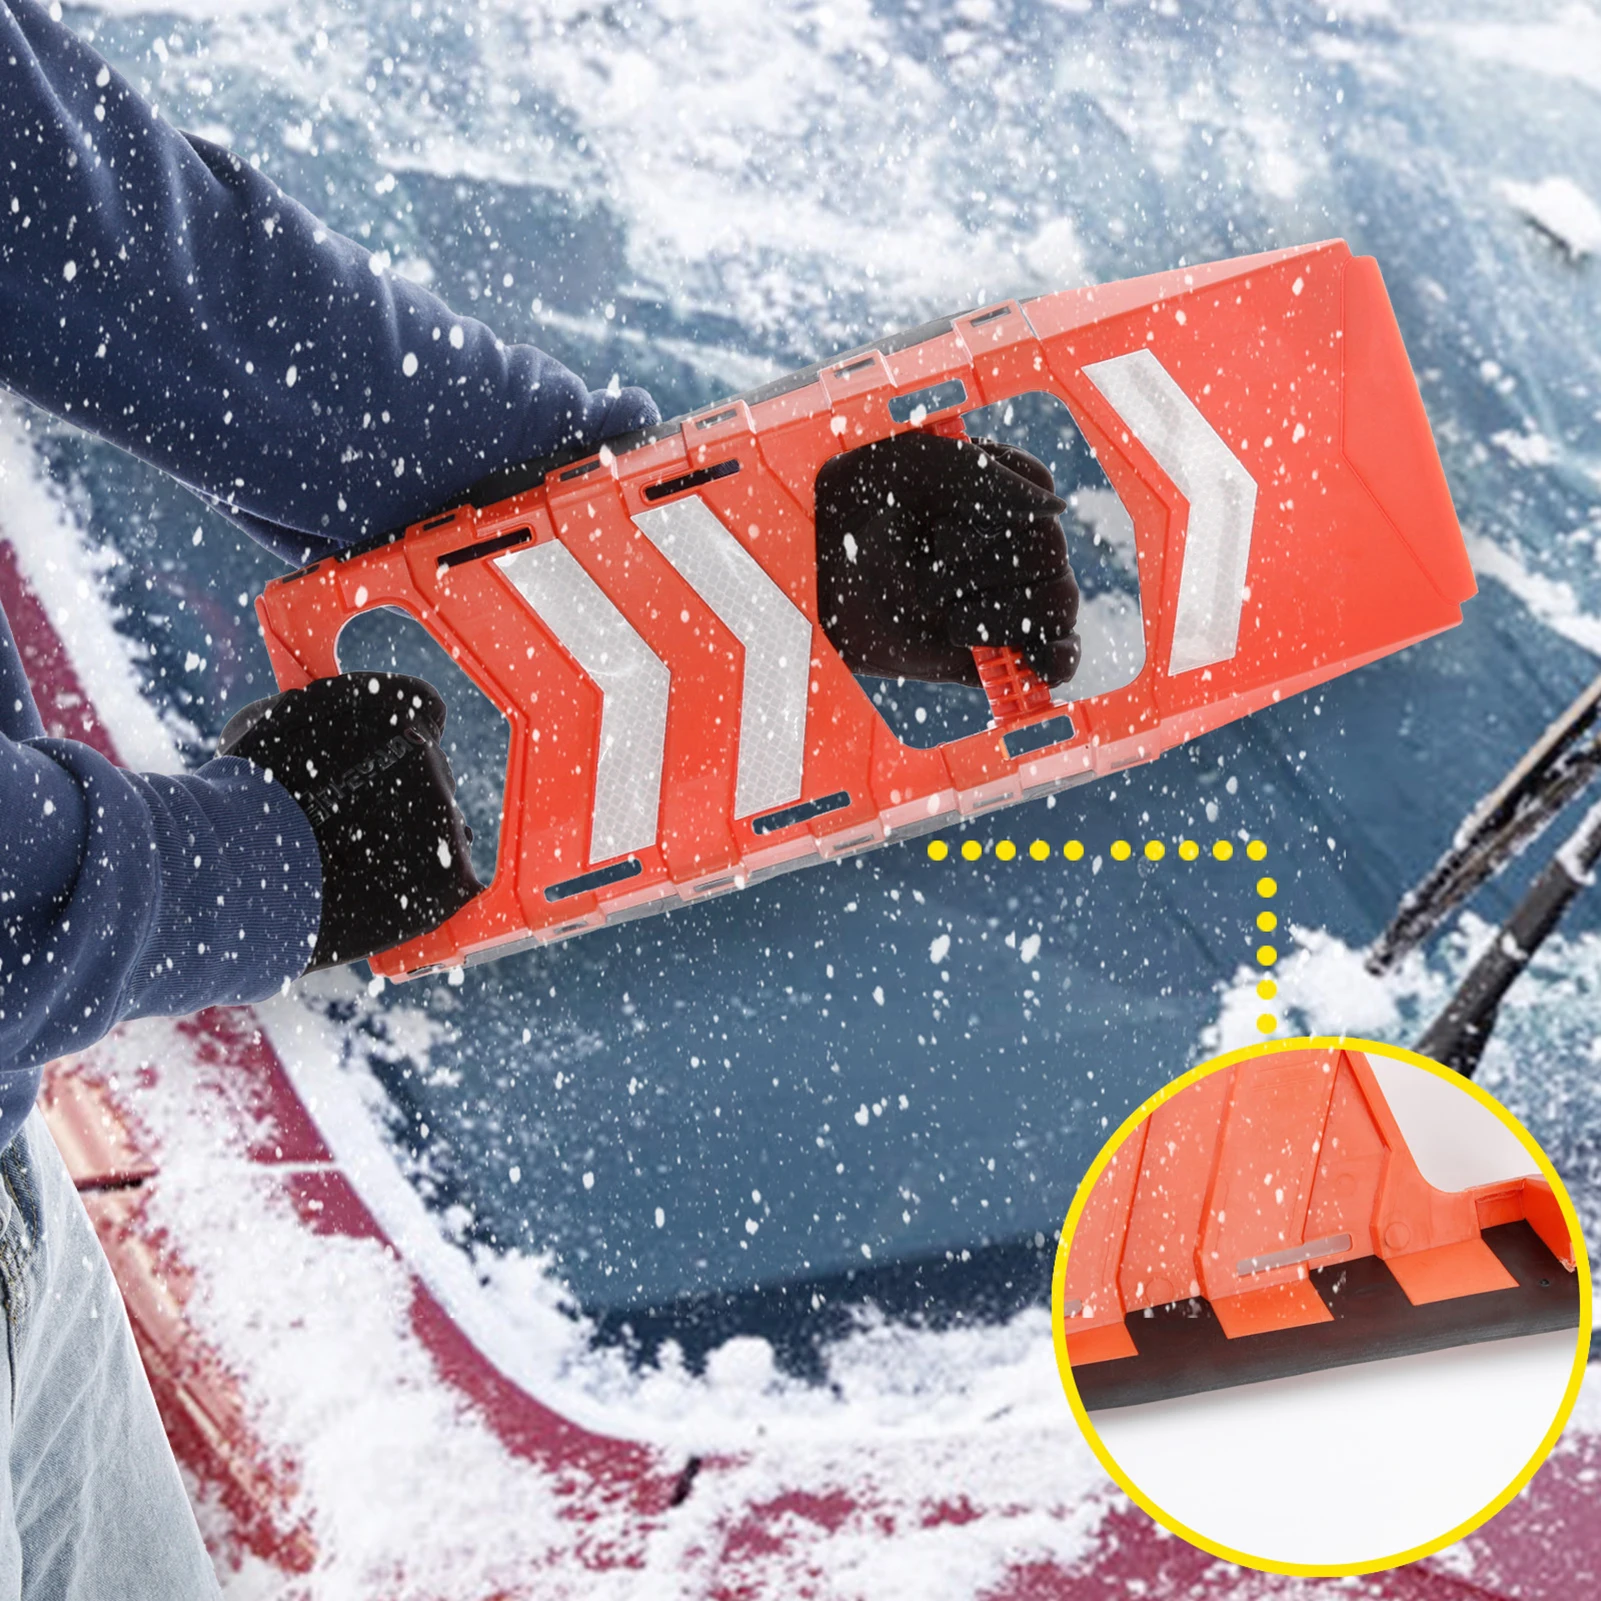 

Multi-purpose Car Snow Shovel Ice Scraper Snow Removal Window Snow Cleaning Scraping Tool Snowfield Car Escape Tool